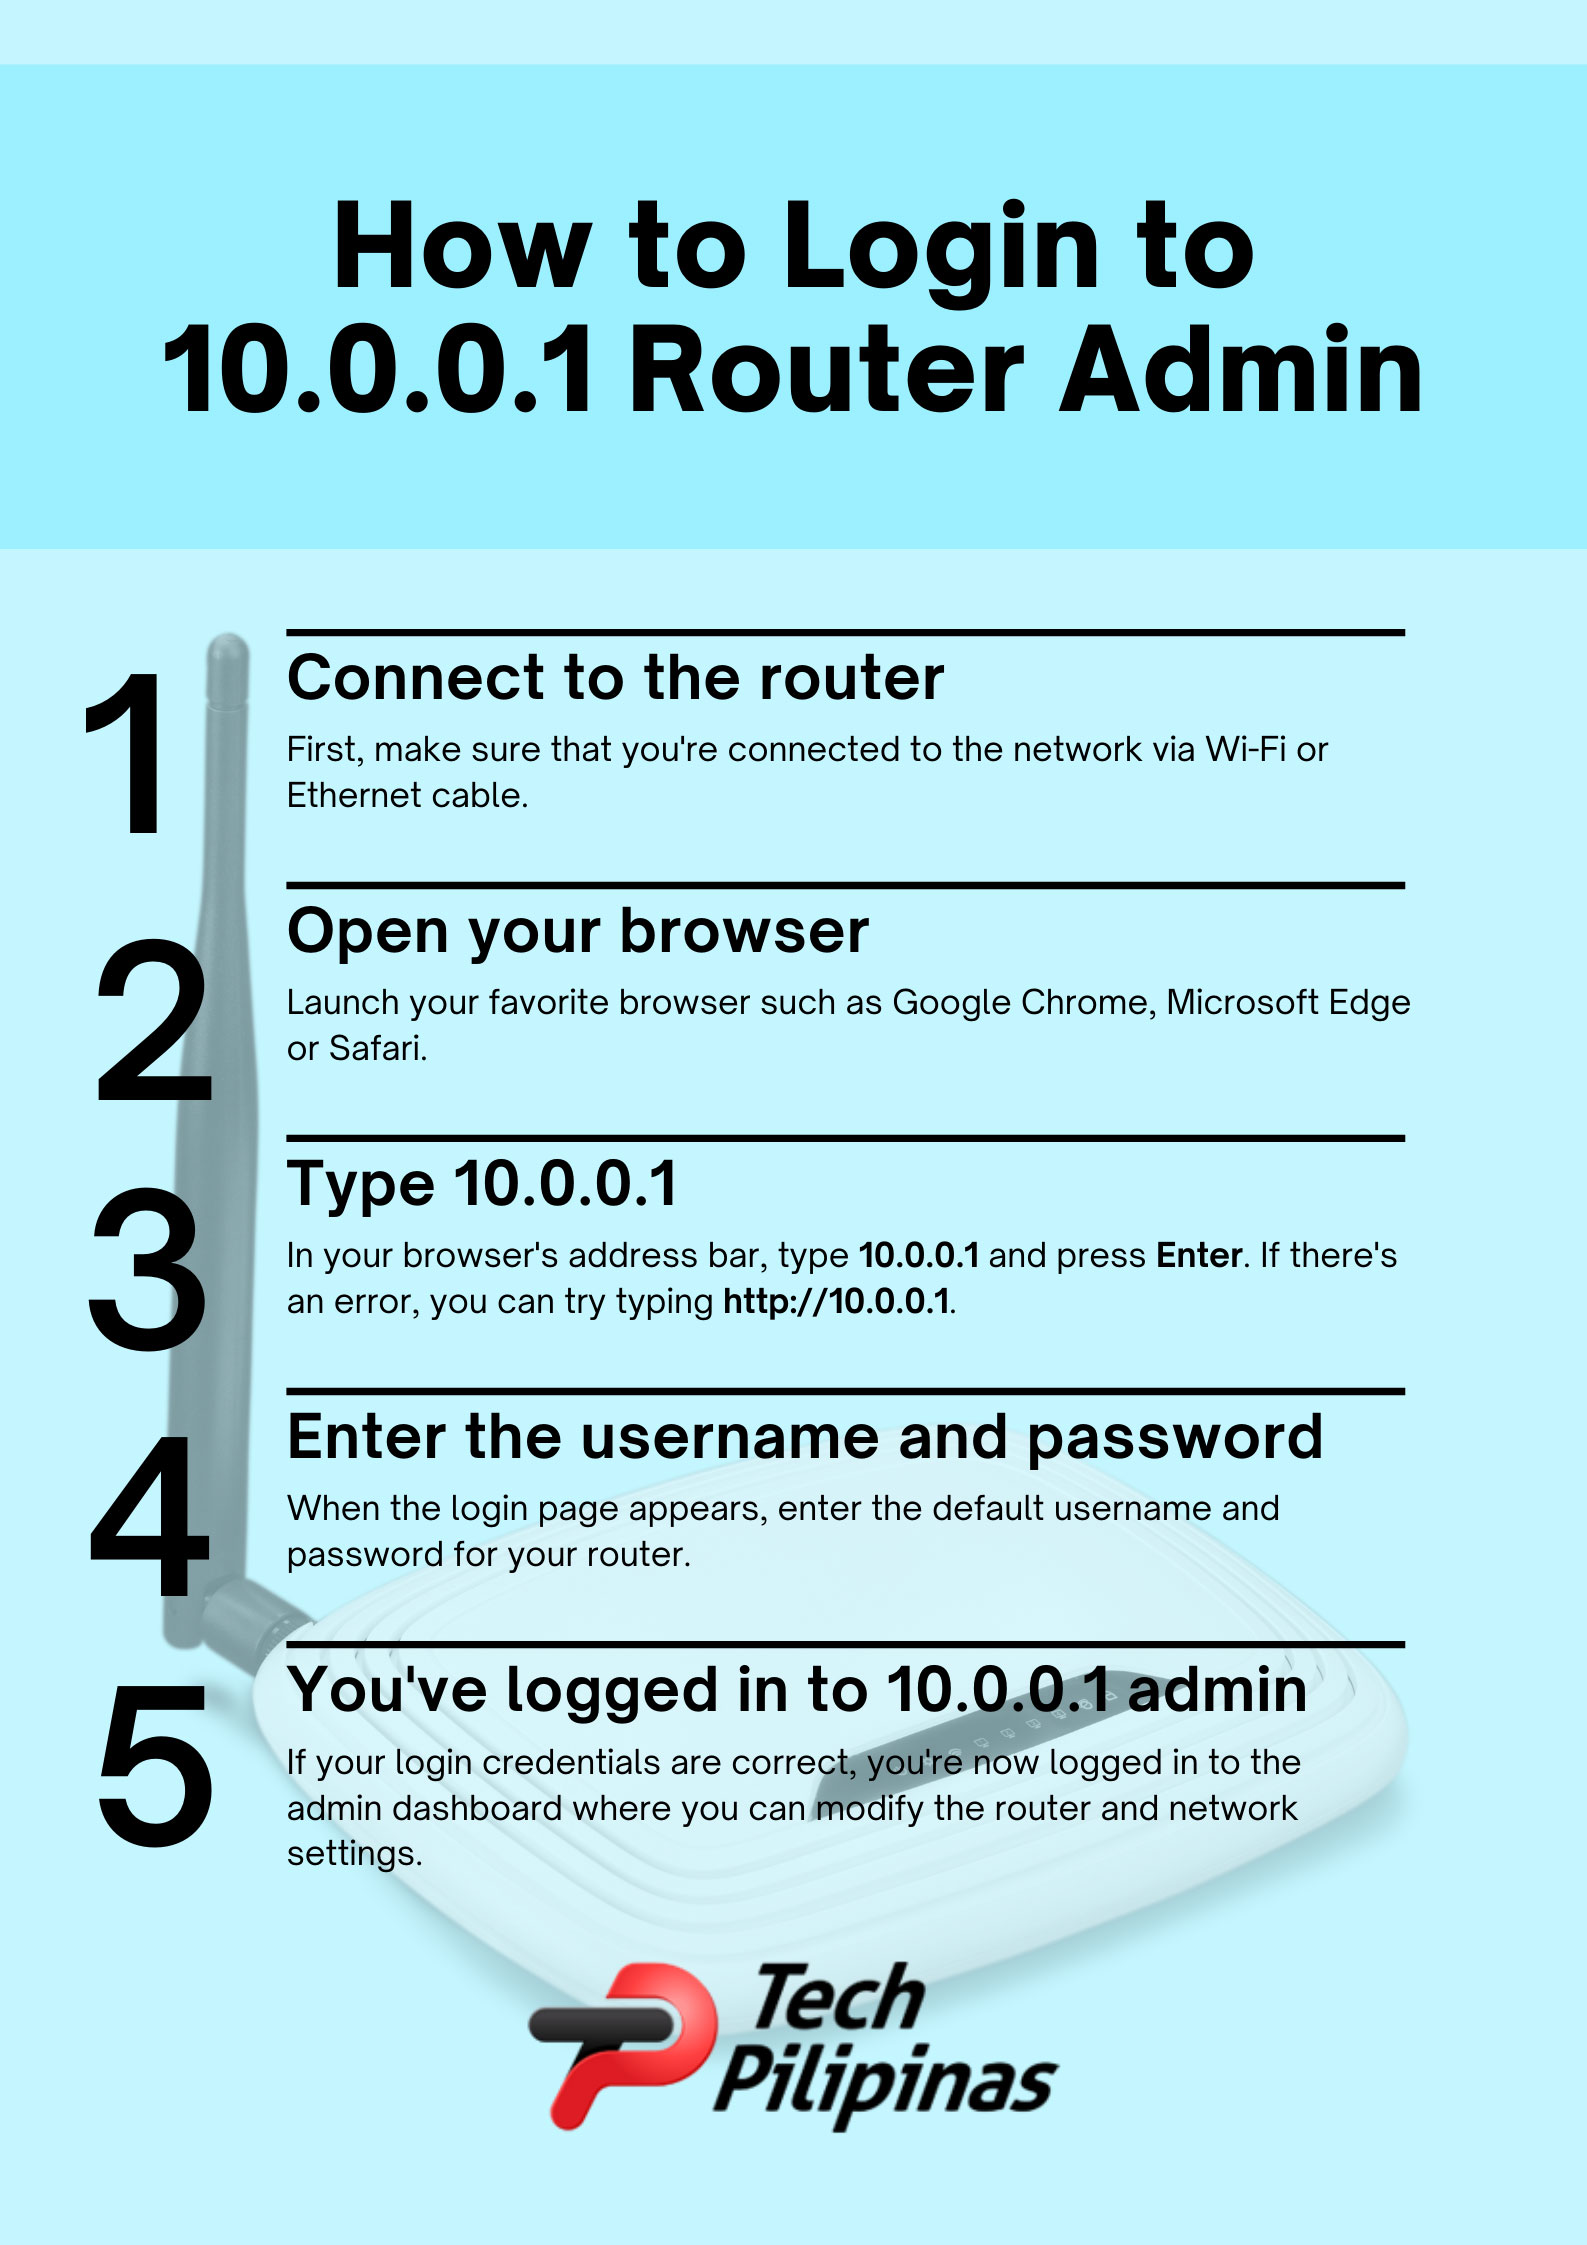 How to login to 10.0.0.1 admin